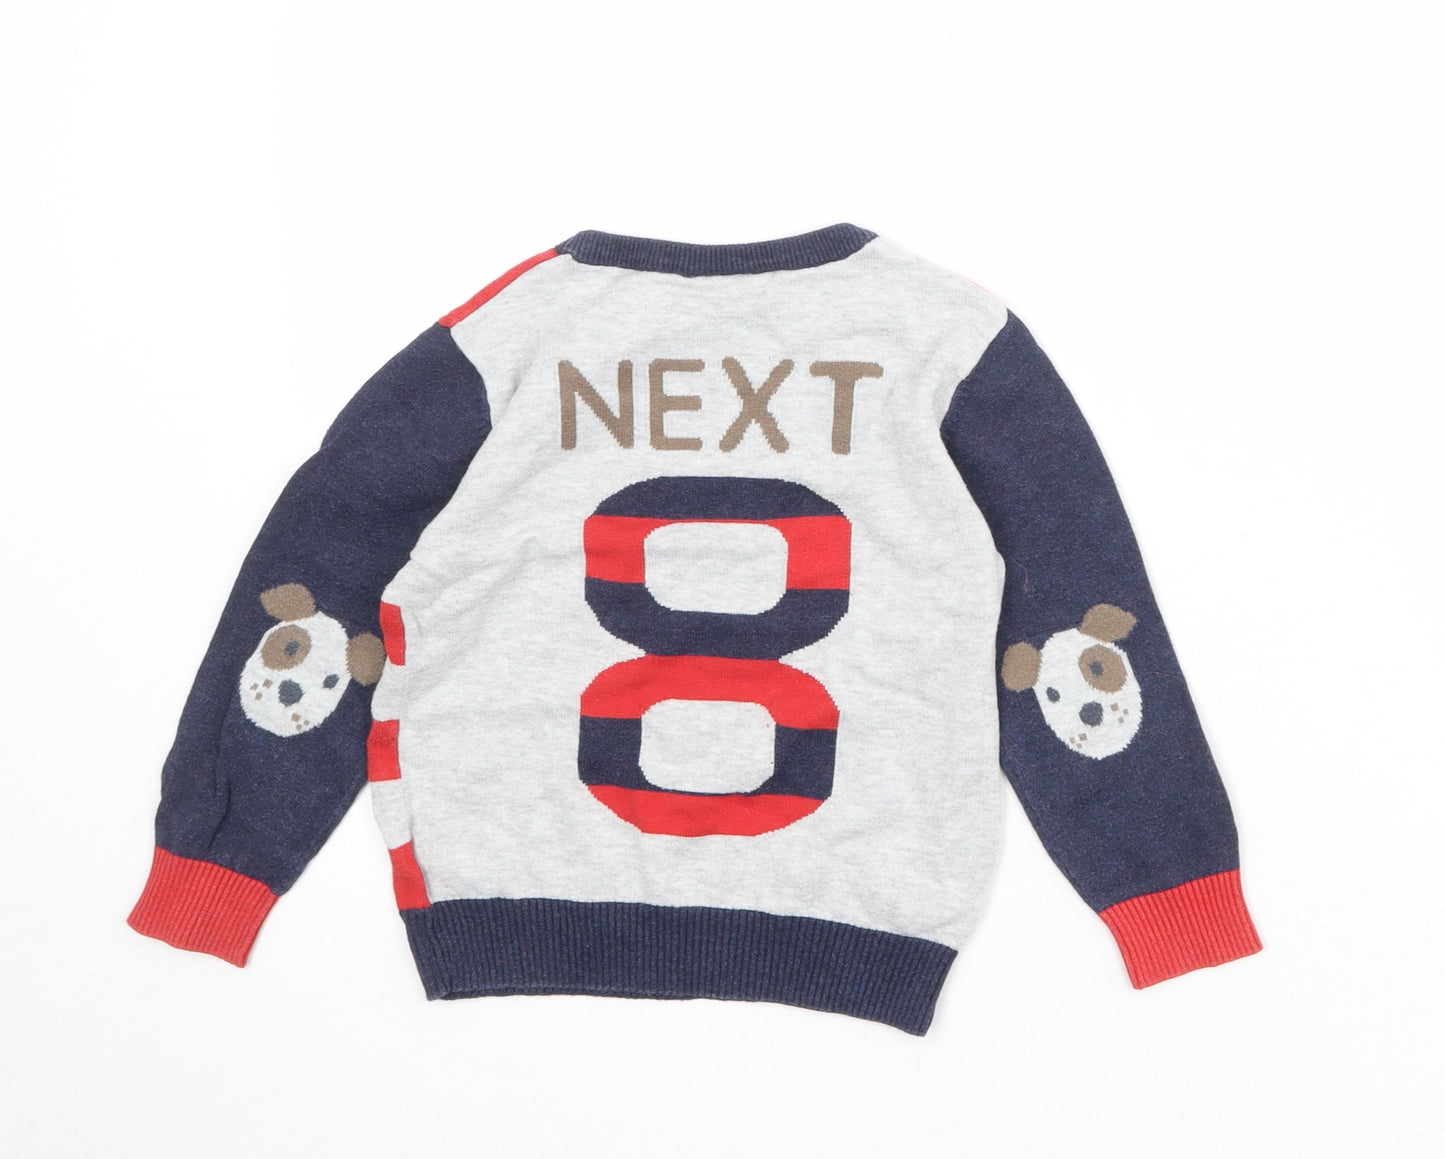 NEXT Boys Multicoloured Round Neck Striped 100% Cotton Pullover Jumper Size 3-4 Years Pullover - Dog Print